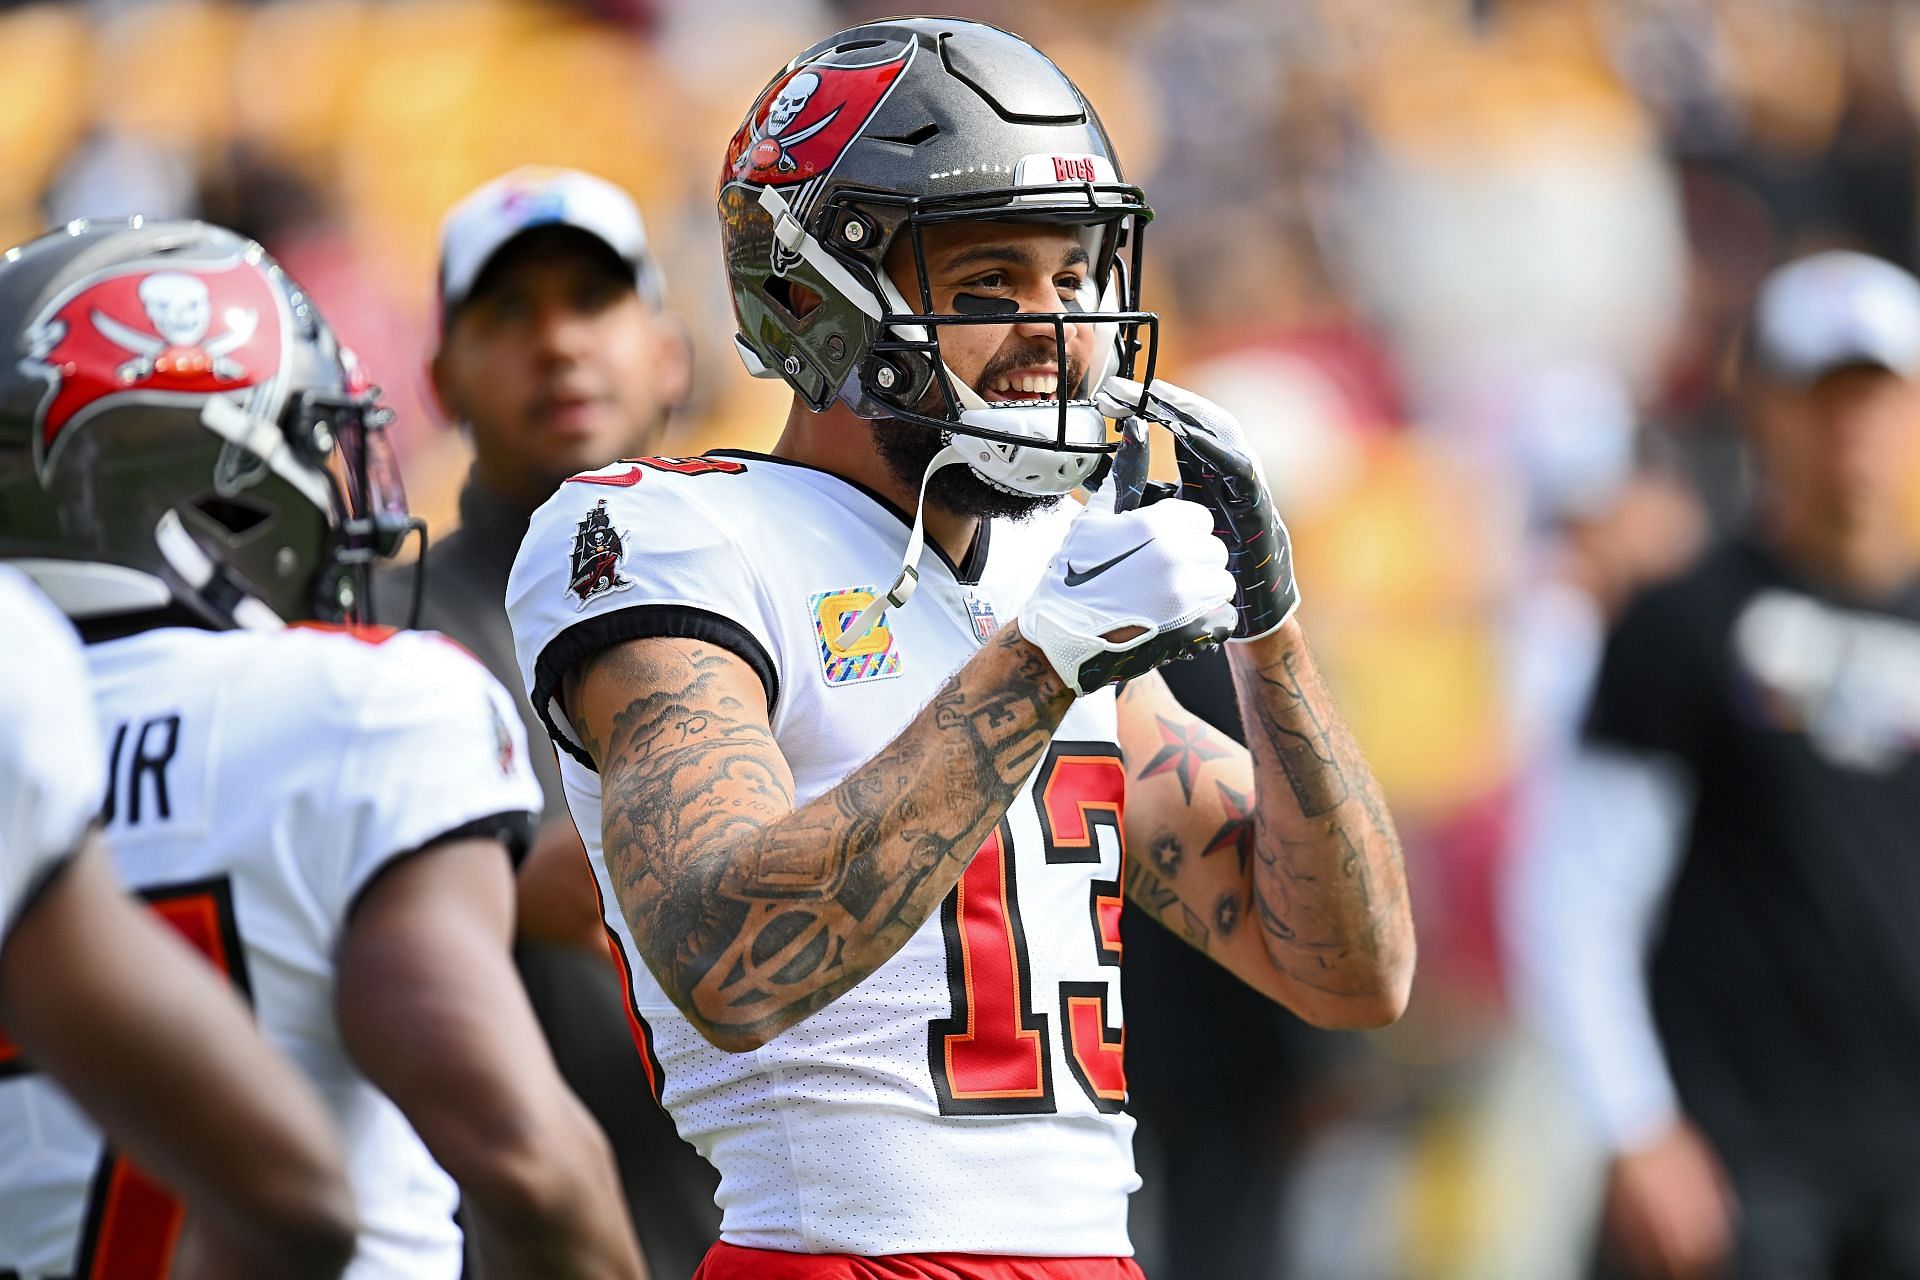 Mike Evans of the Tampa Bay Buccaneers